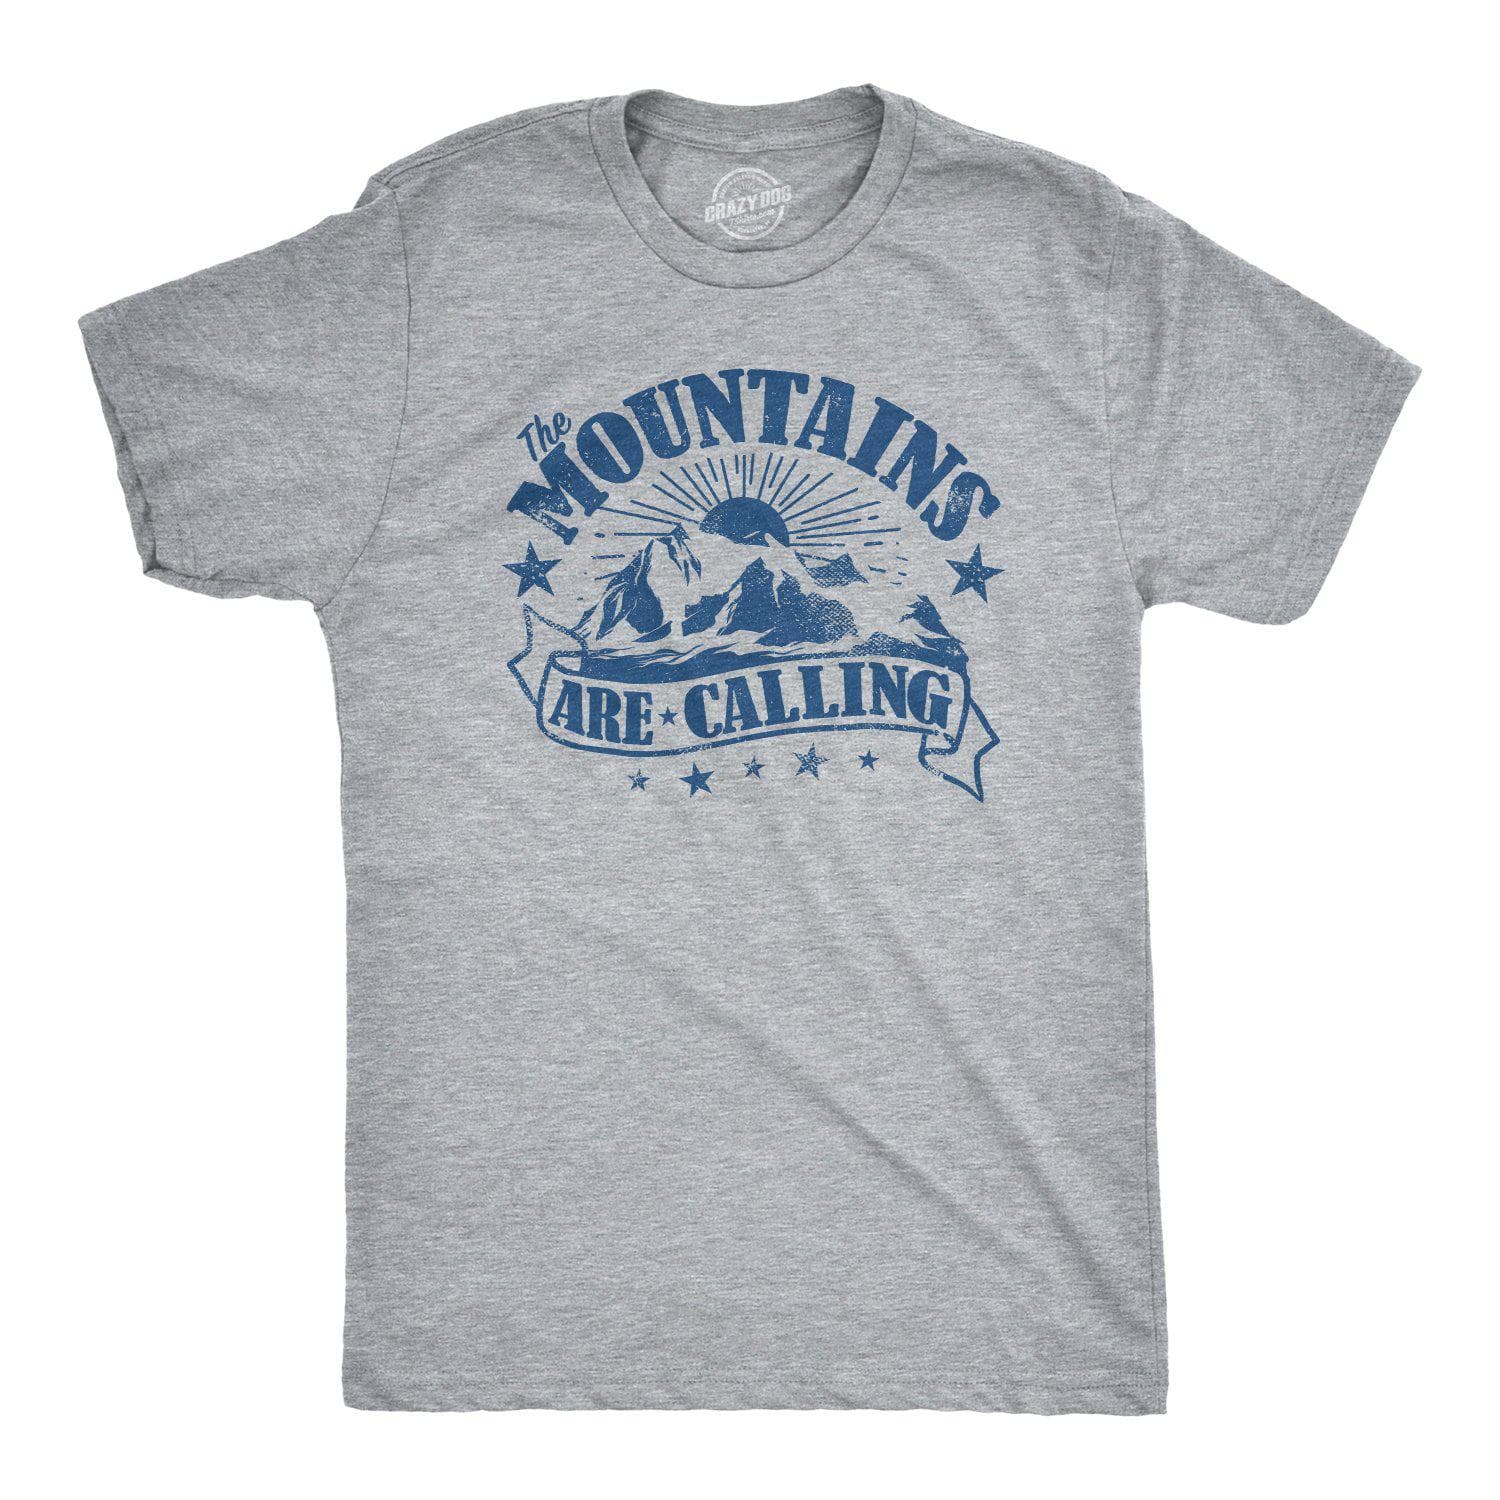 The Mountains Are Calling Men's Tshirt - Crazy Dog T-Shirts